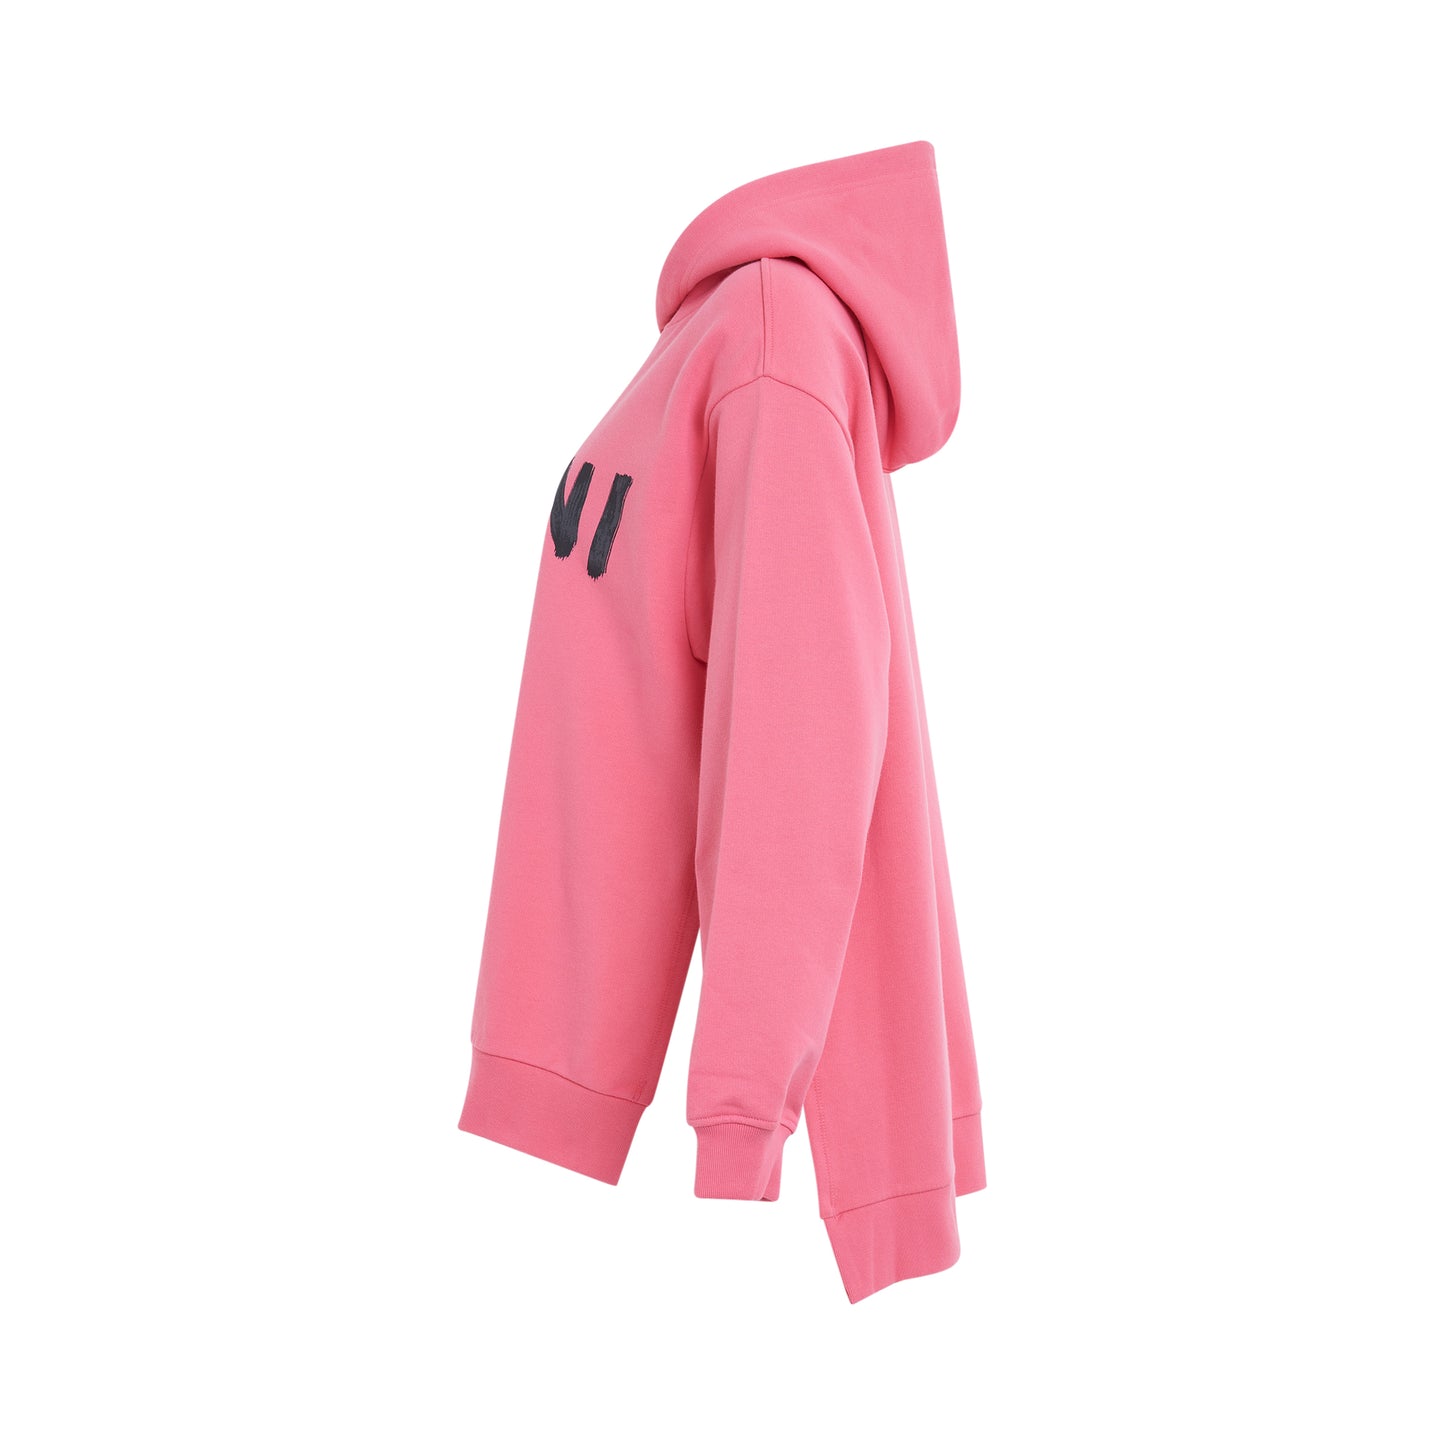 Logo Print Hoodie in Pink Candy